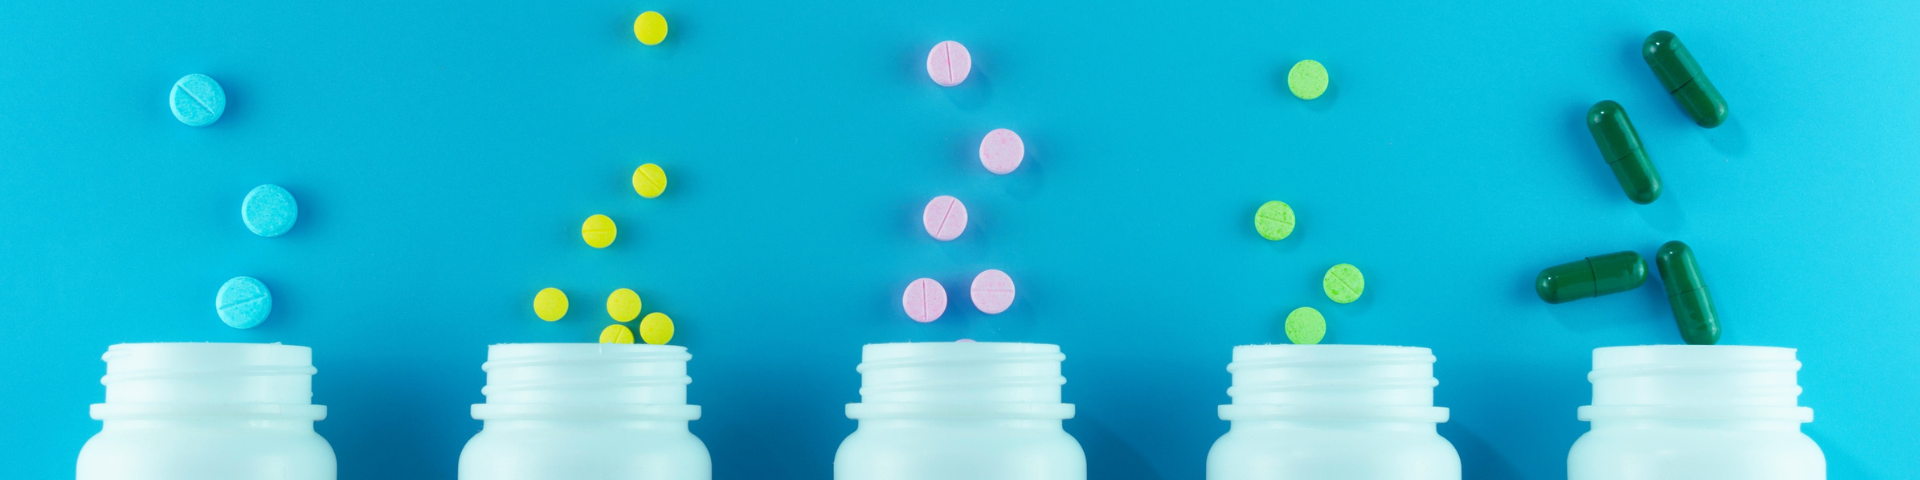 Various pill bottles lined up against a blue background.